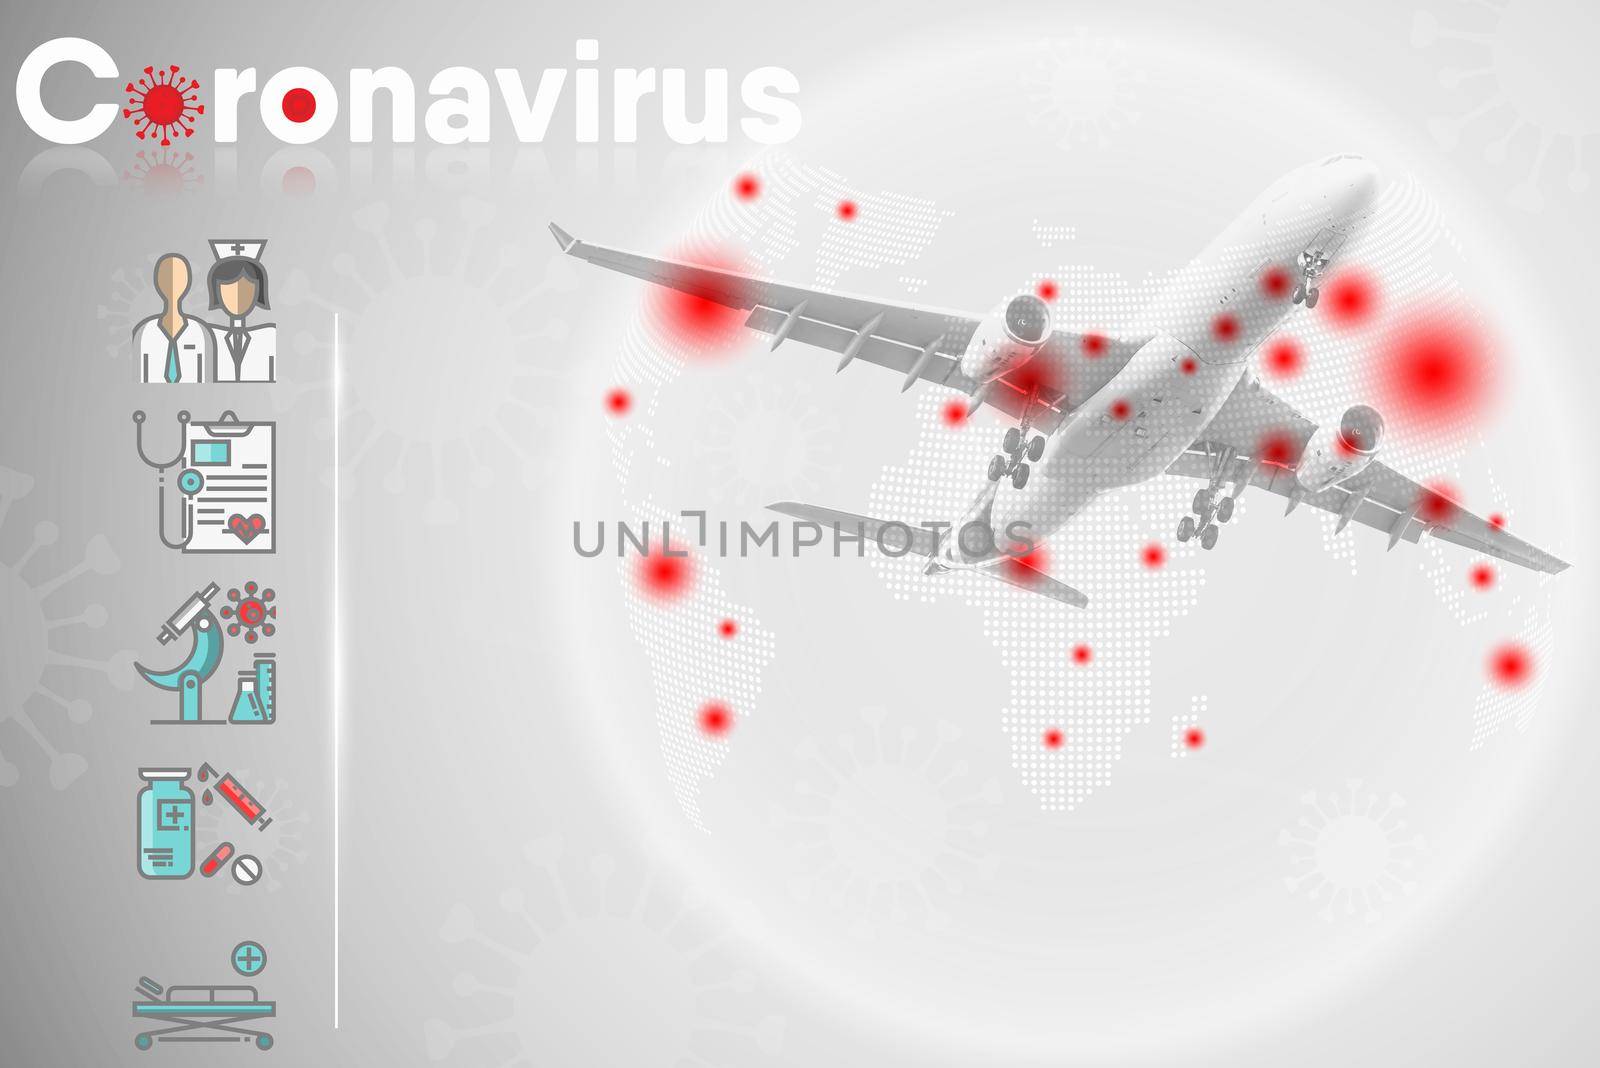 Coronavirus Crisis and Health Prevention From Covid-19 Virus of Public Airplane Aviation, Medical Covid Pandemic Guideline Template for Passenger of Transportation Airline. Healthcare/Medicine Concept